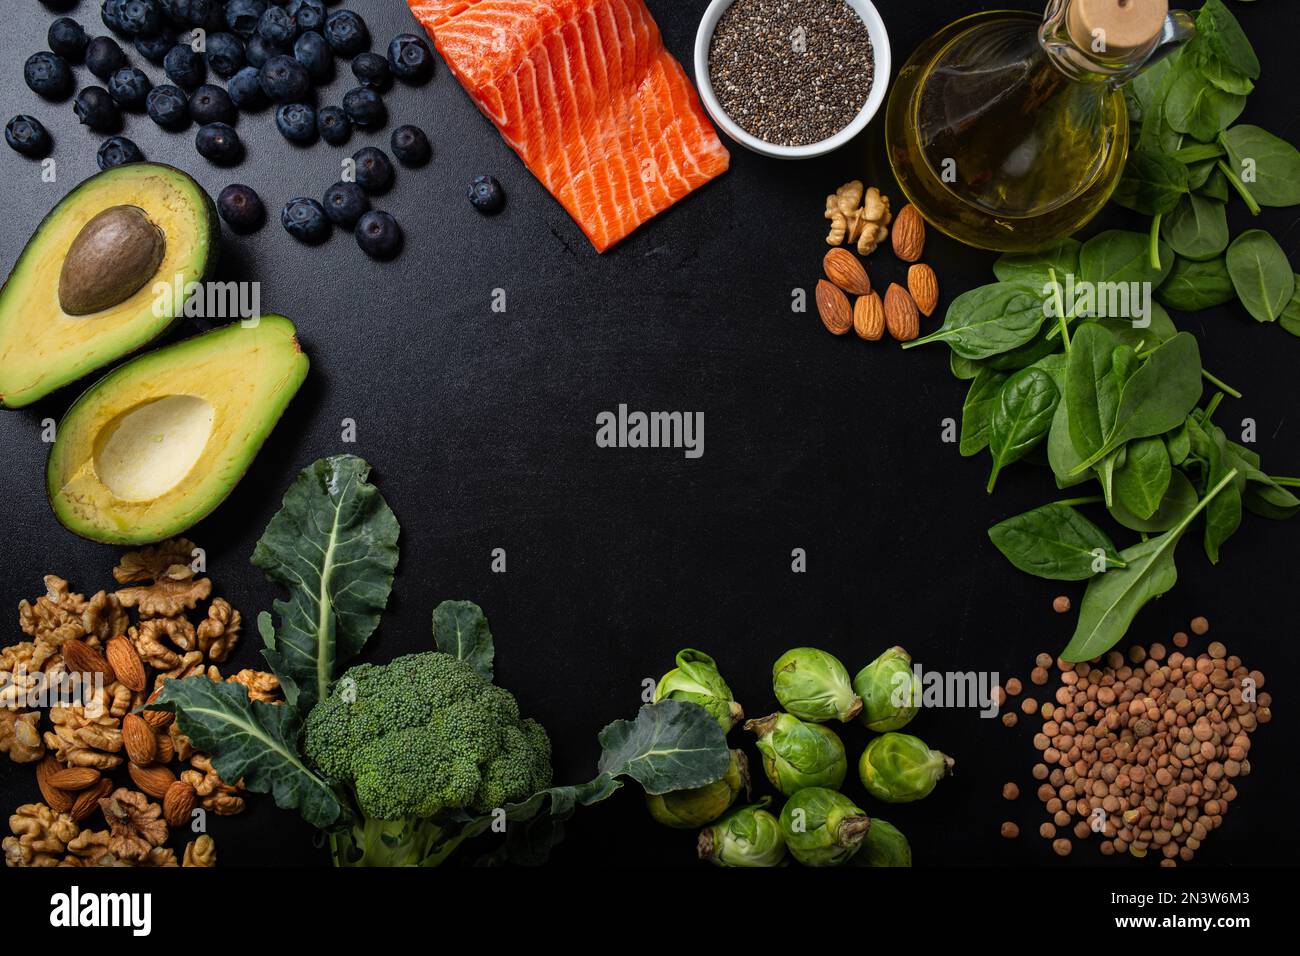 Healthy food background with good fat sources, ingredients rich in Omega fatty acids: salmon fillet, vegetables, berries, nuts, seeds, olive oil Stock Photo